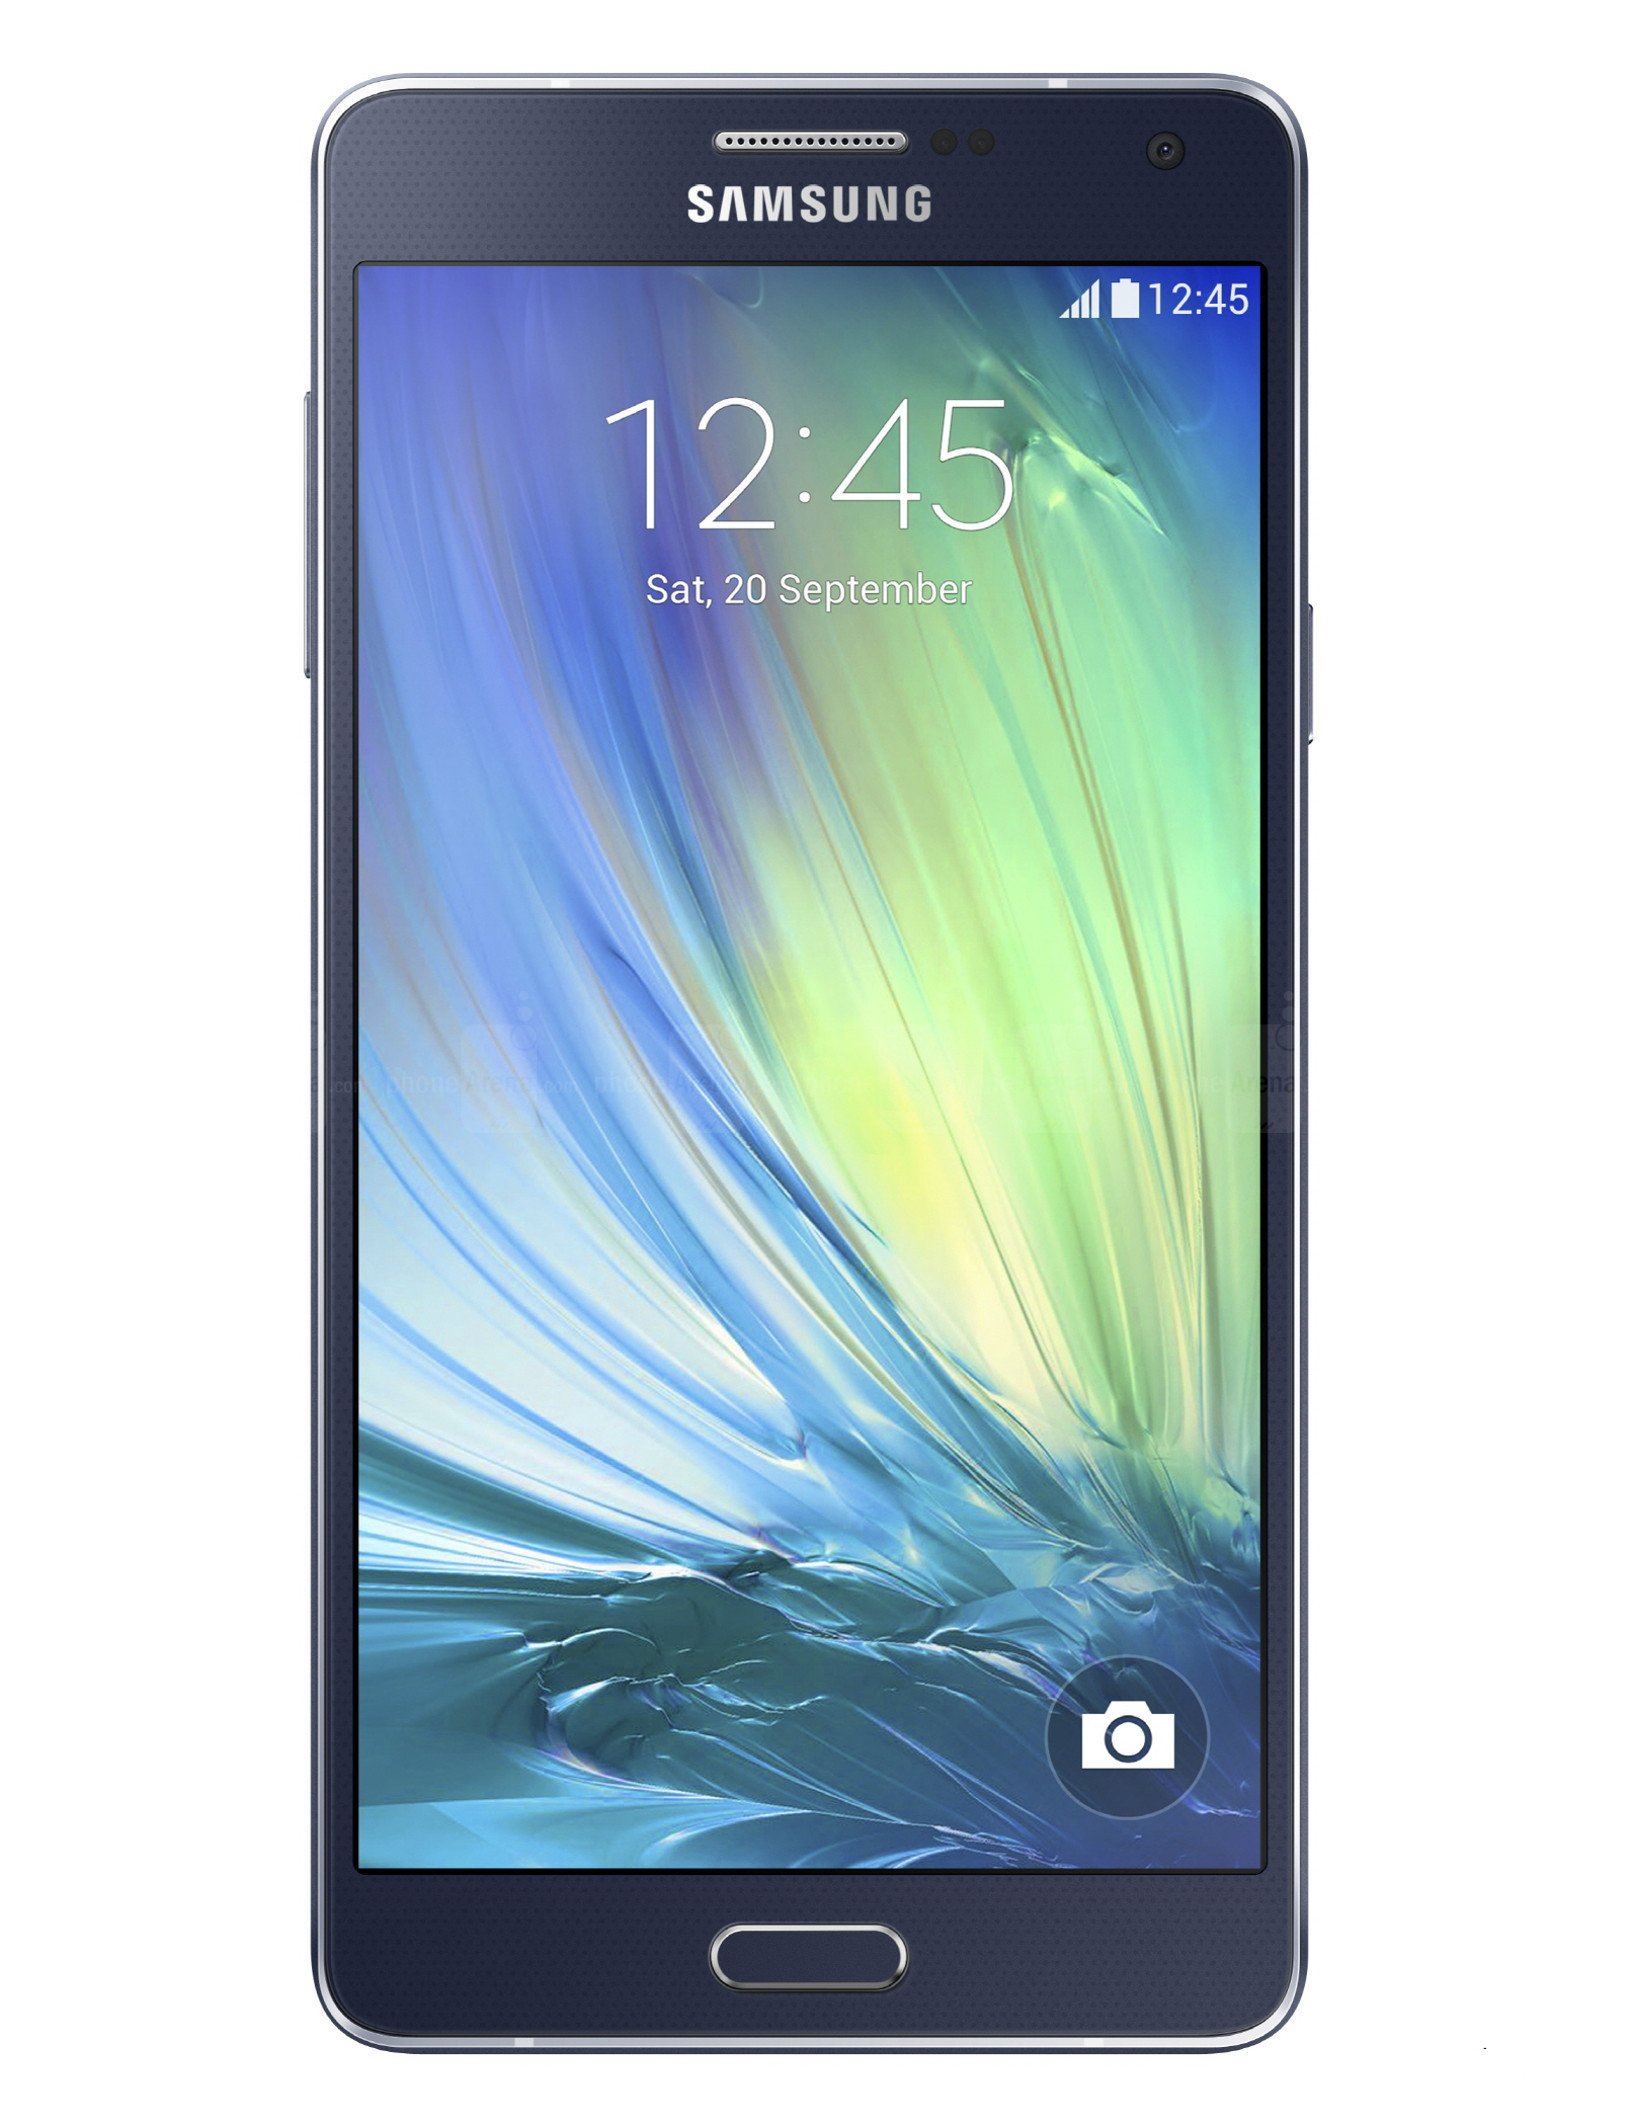 Samsung Galaxy A7 specs, review, release date - PhonesData